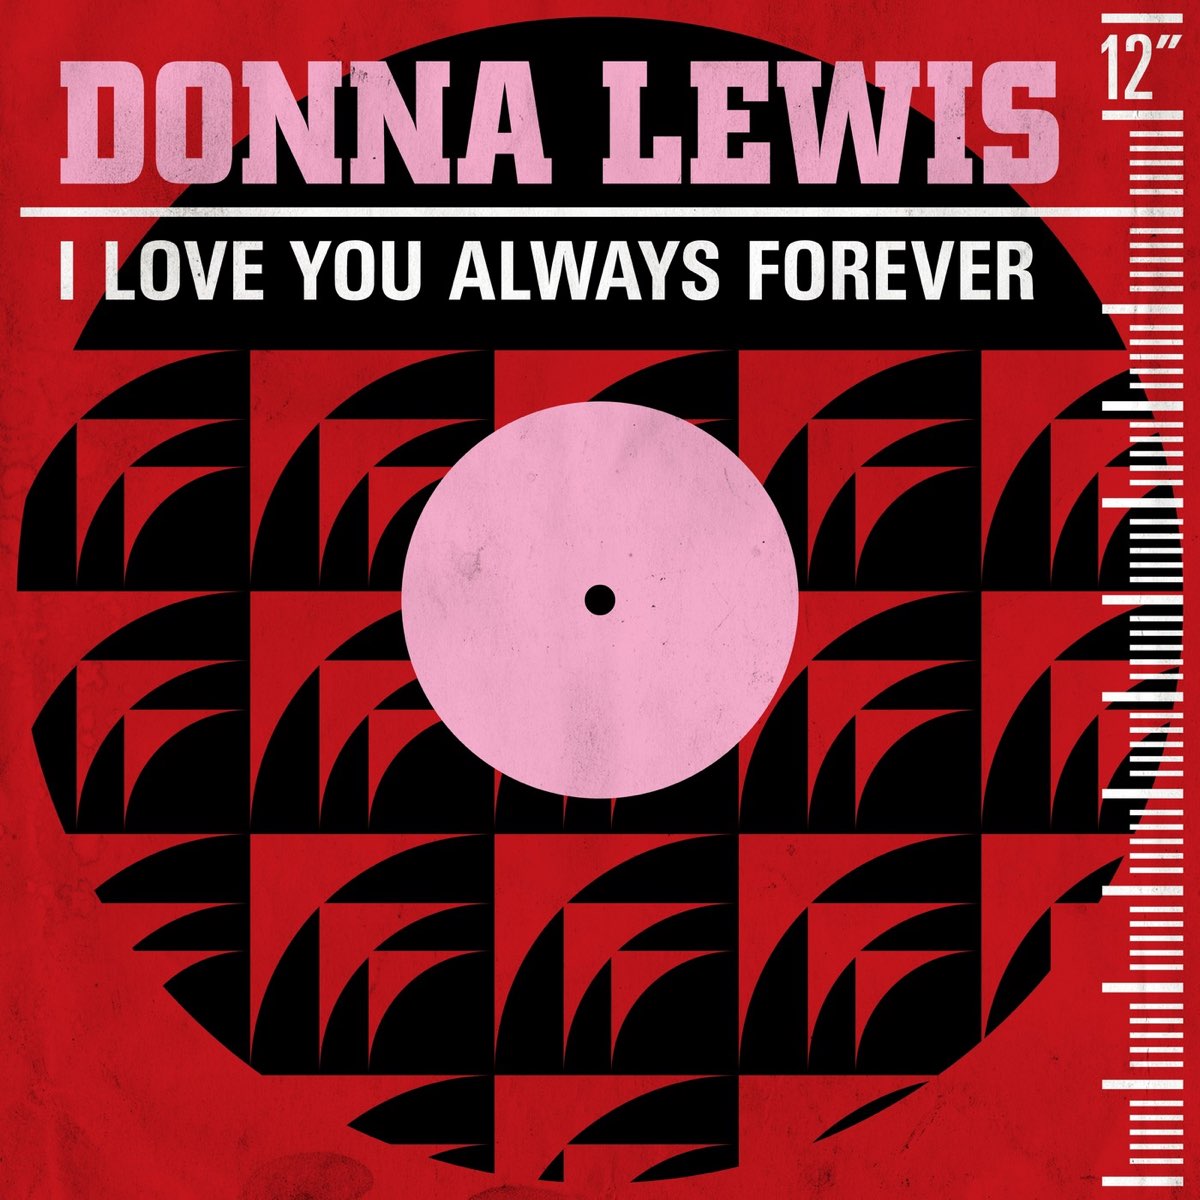 I Love You Always Forever - EP by Donna Lewis on Apple Music